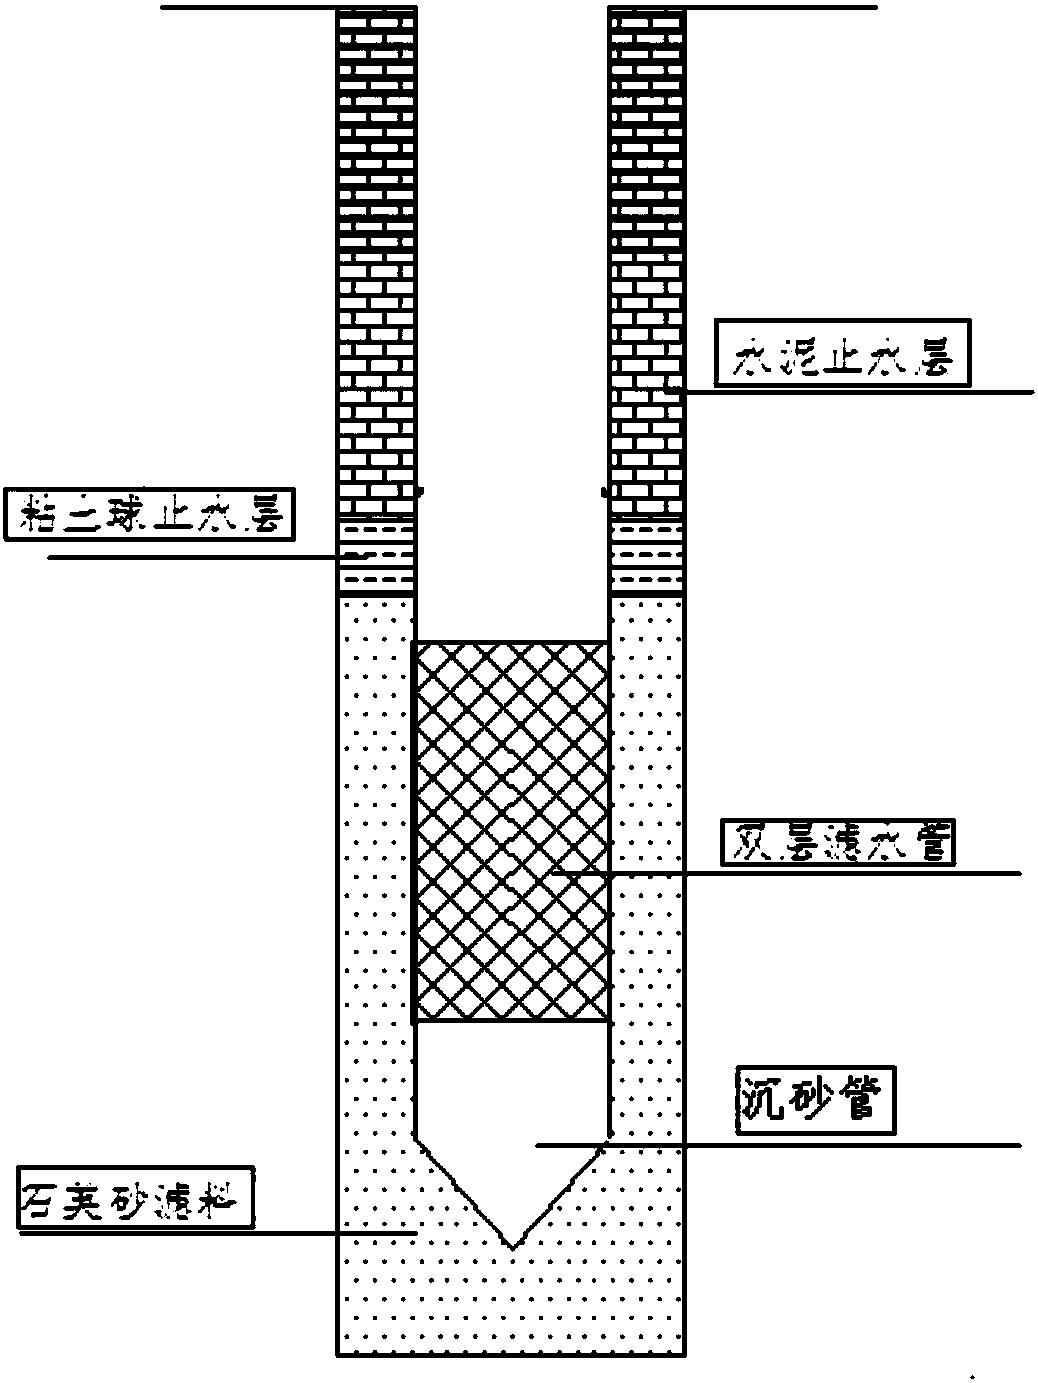 Construction method of high pressure inverted well